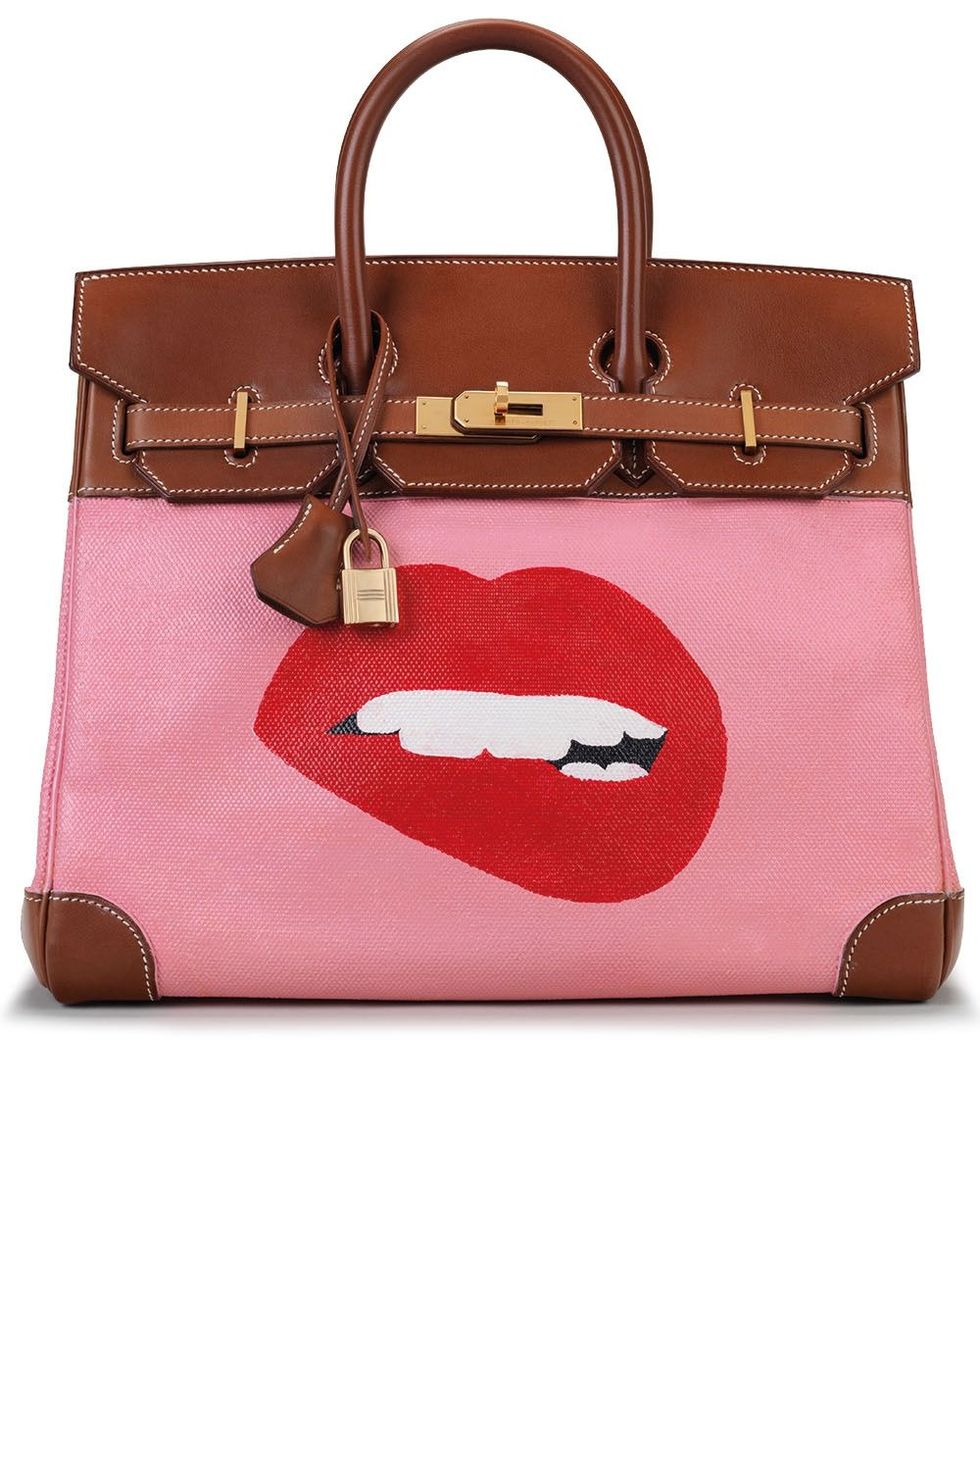 Handbag, Bag, Pink, Fashion accessory, Beauty, Brown, Shoulder bag, Leather, Luggage and bags, Material property, 